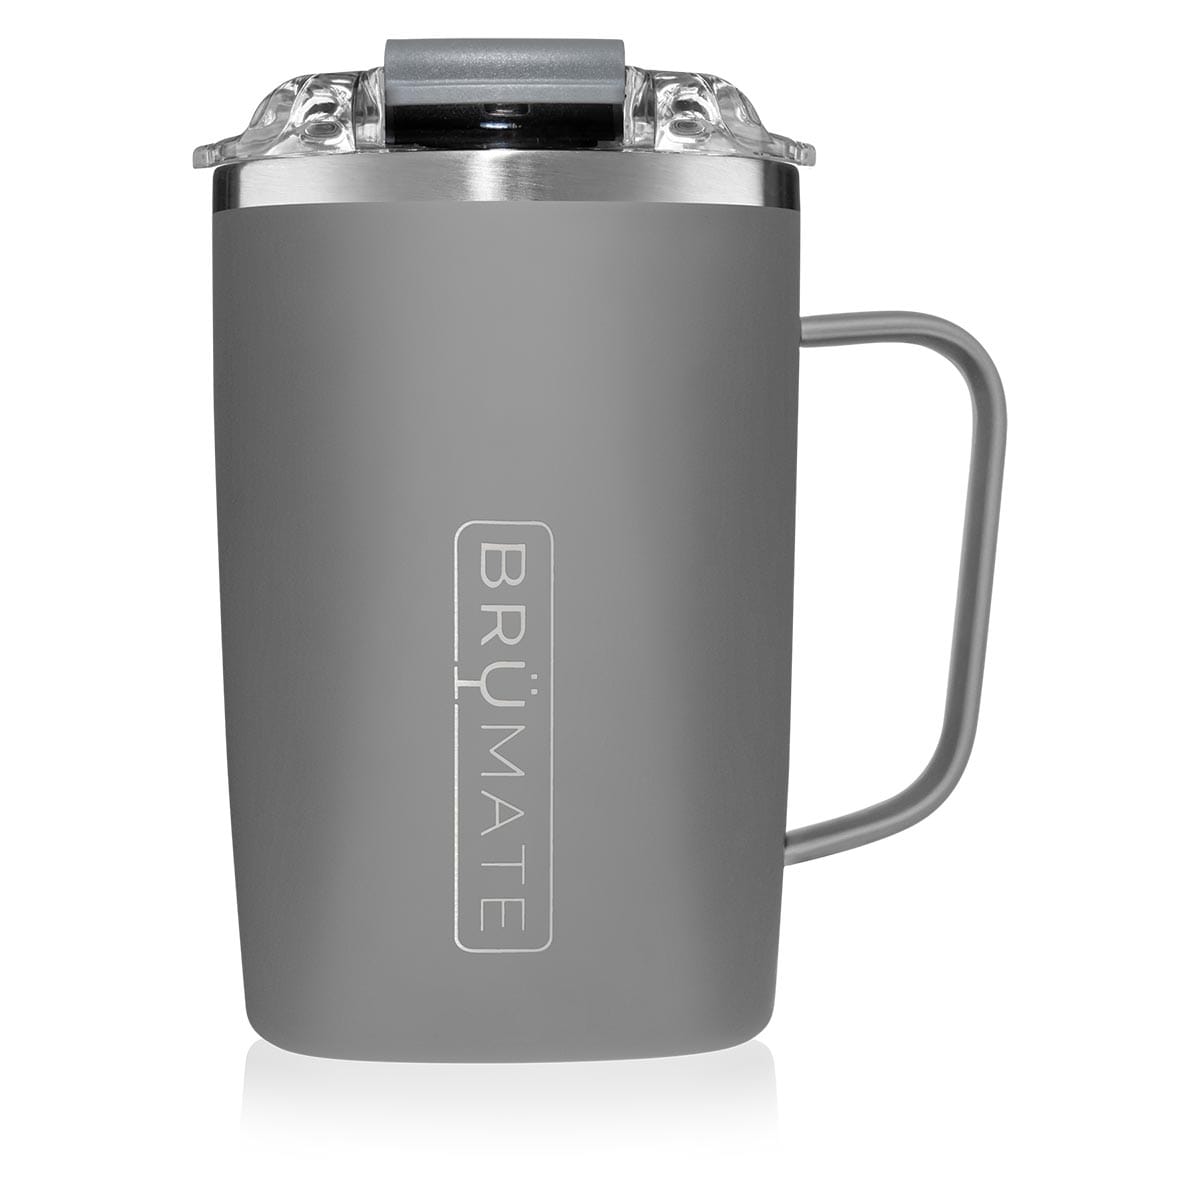 16 oz Toddy - Ice White - by Brumate